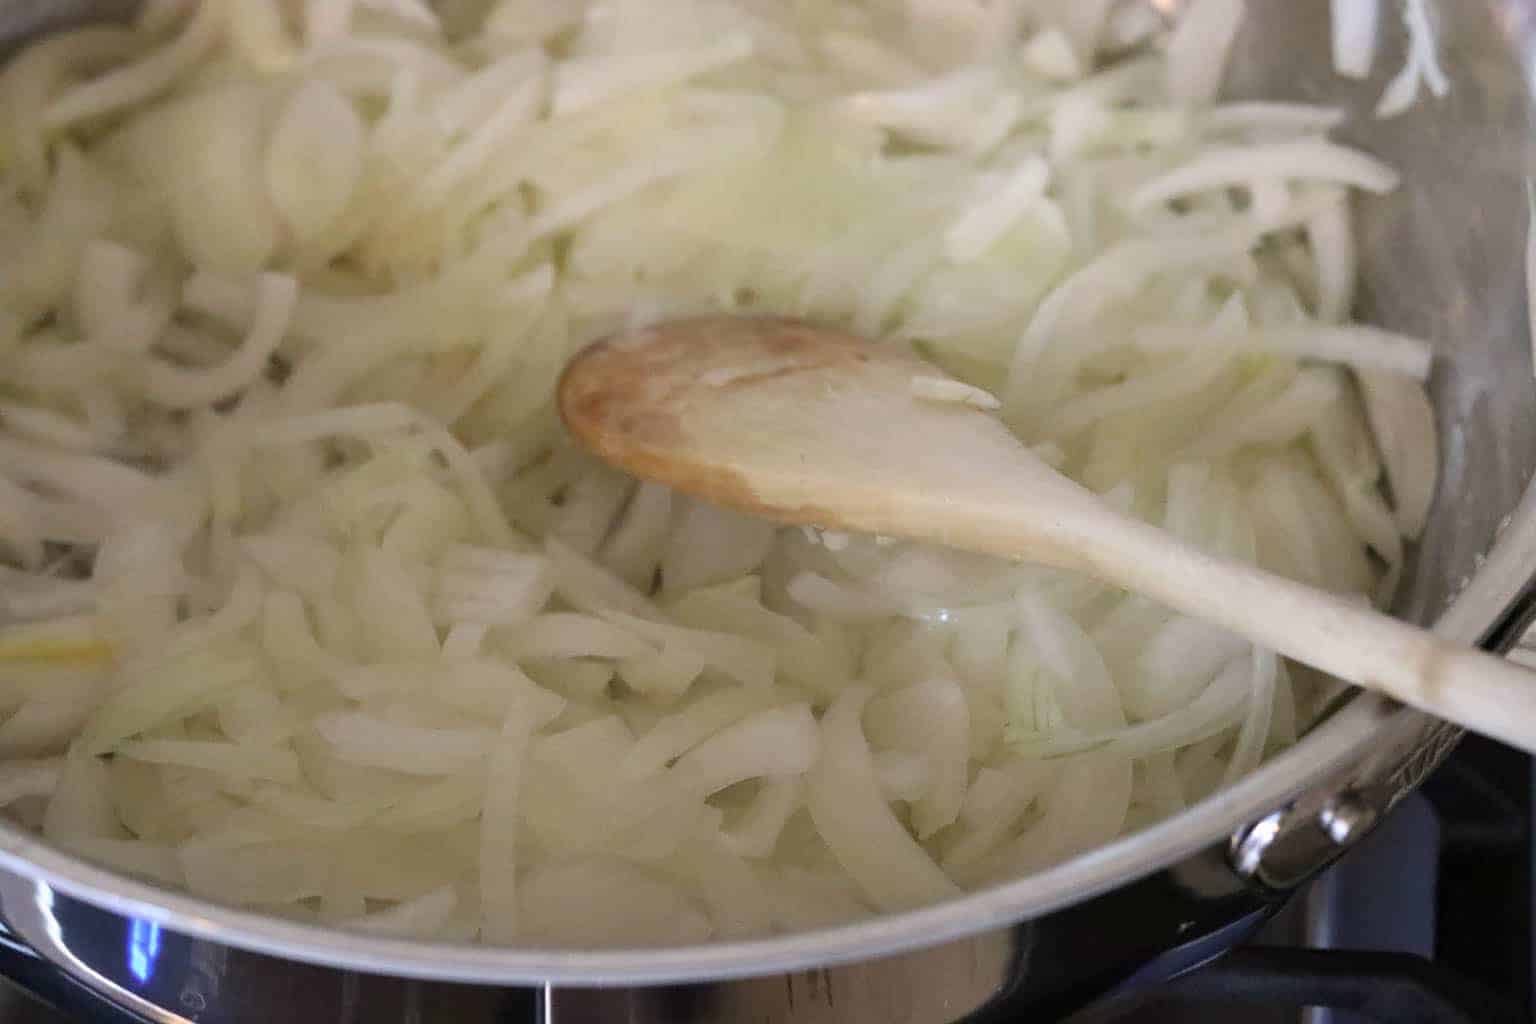 Sliced onions in a metal pan with wooden spoon from Gourmet Done Skinny